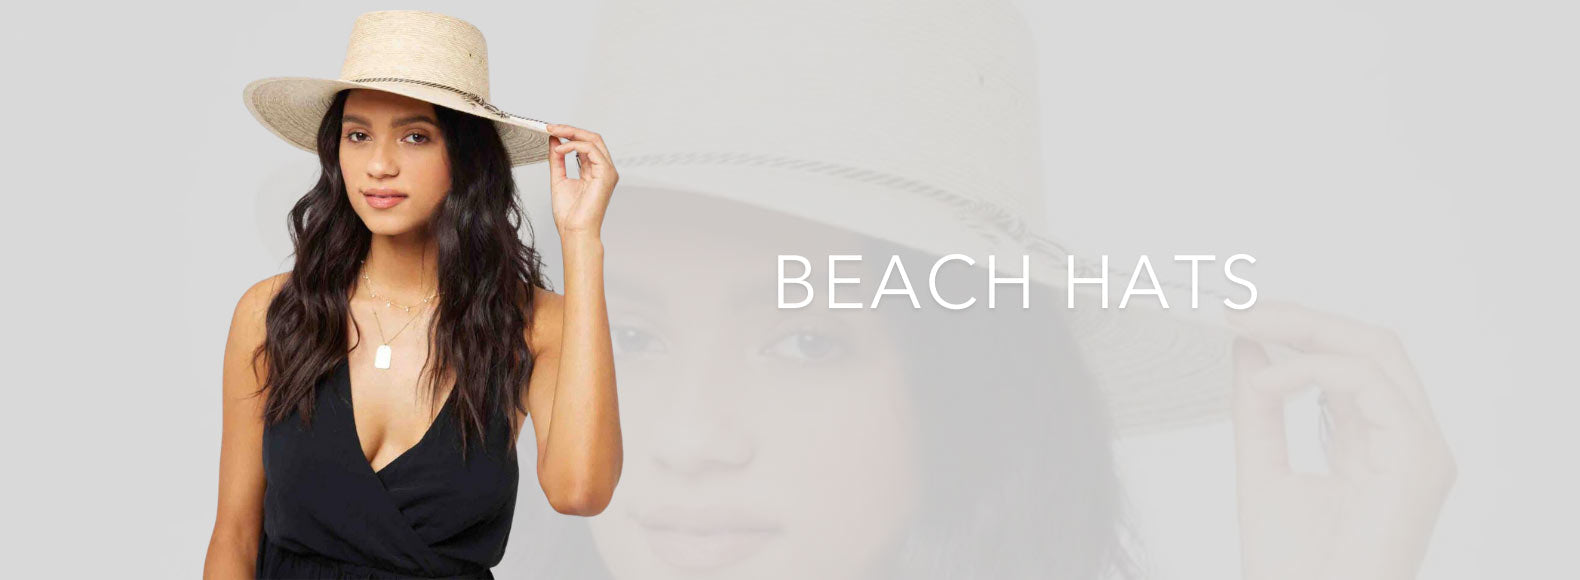 beach hat collections